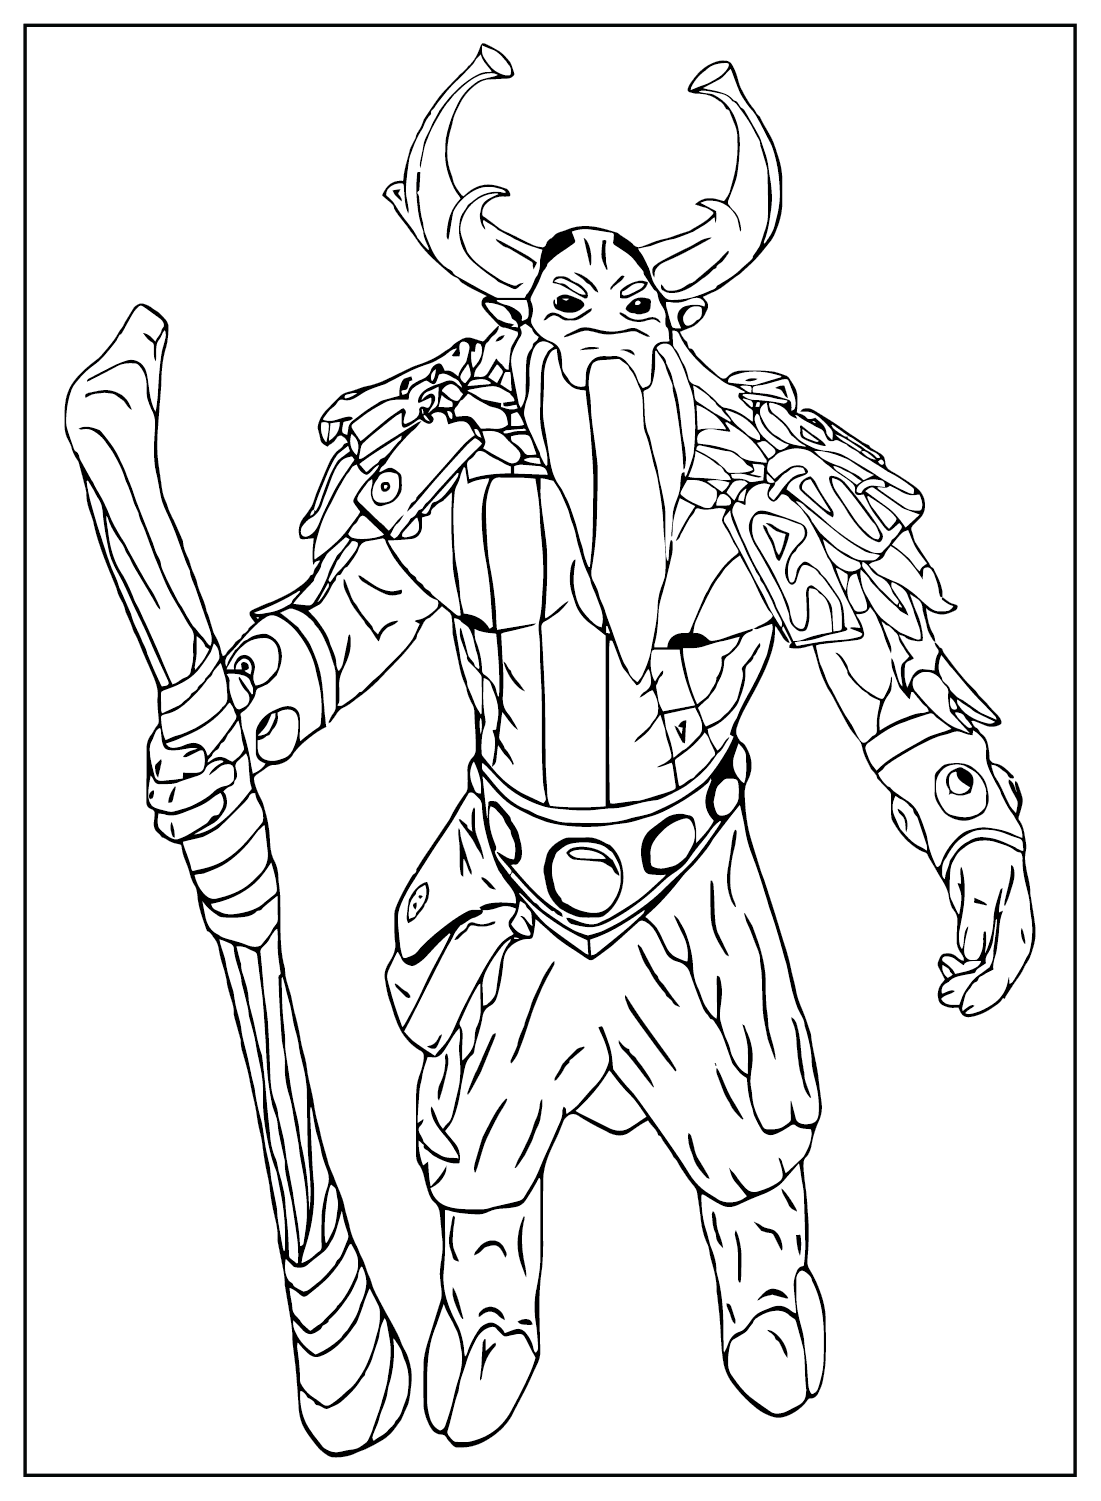 Dota 2 Coloring Page Free from Dota 2